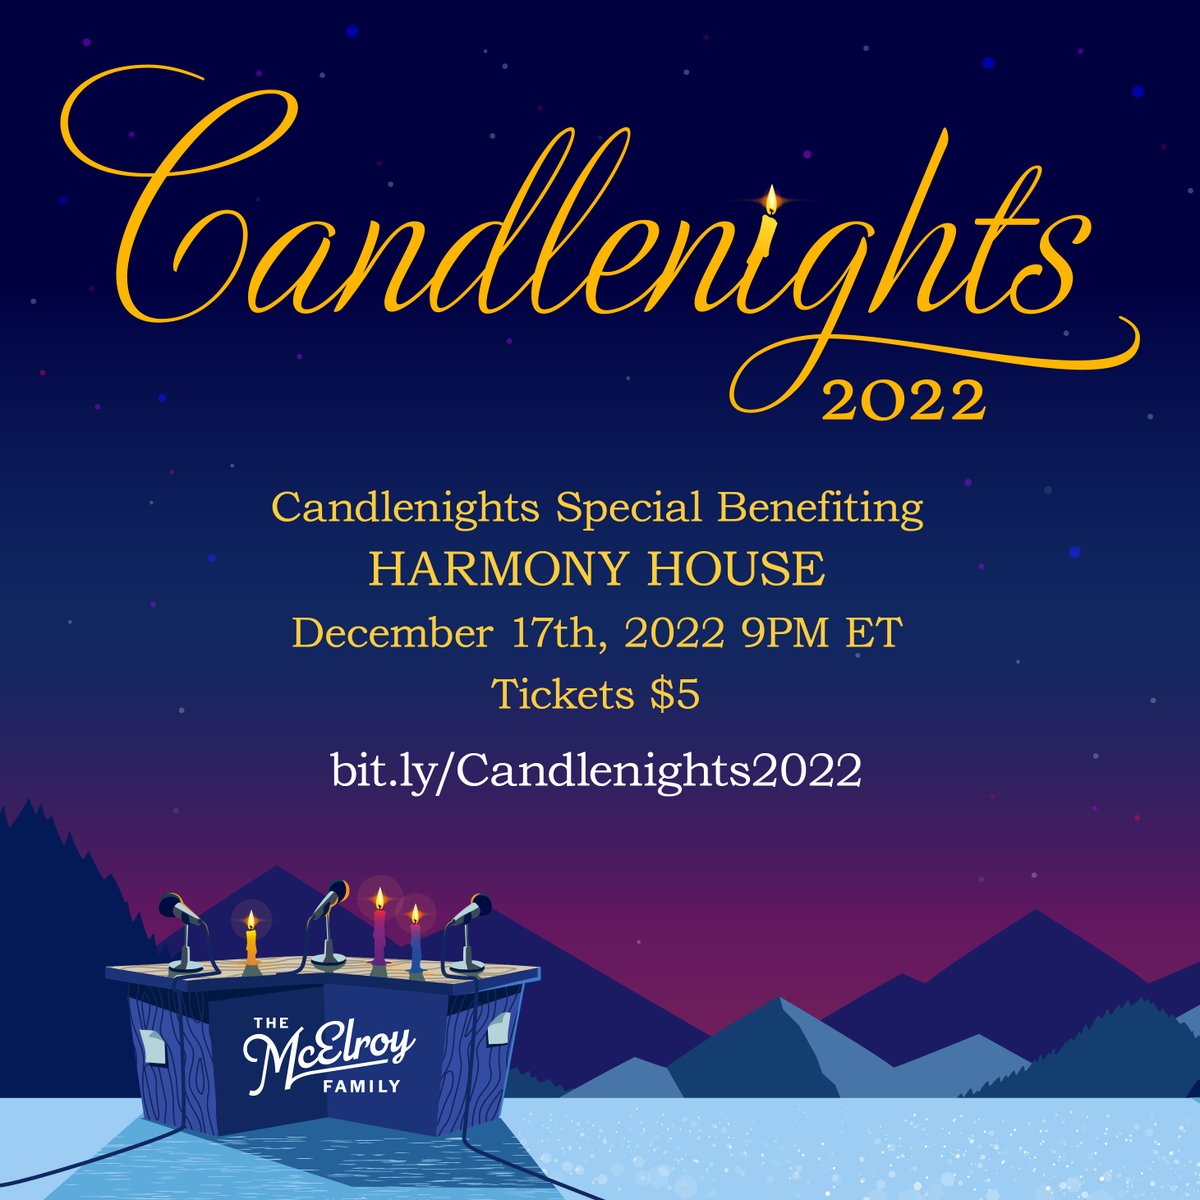 The 2022 #Candlenights Spectacular is Dec. 17th! This pre-taped extravaganza features segments from #MBMBaM, Sawbones, Shmanners, Wonderful!, & special guests! All proceeds will go to @HarmonyHouseWV. Tickets are $5 with an option to give more, get them at bit.ly/Candlenights20…